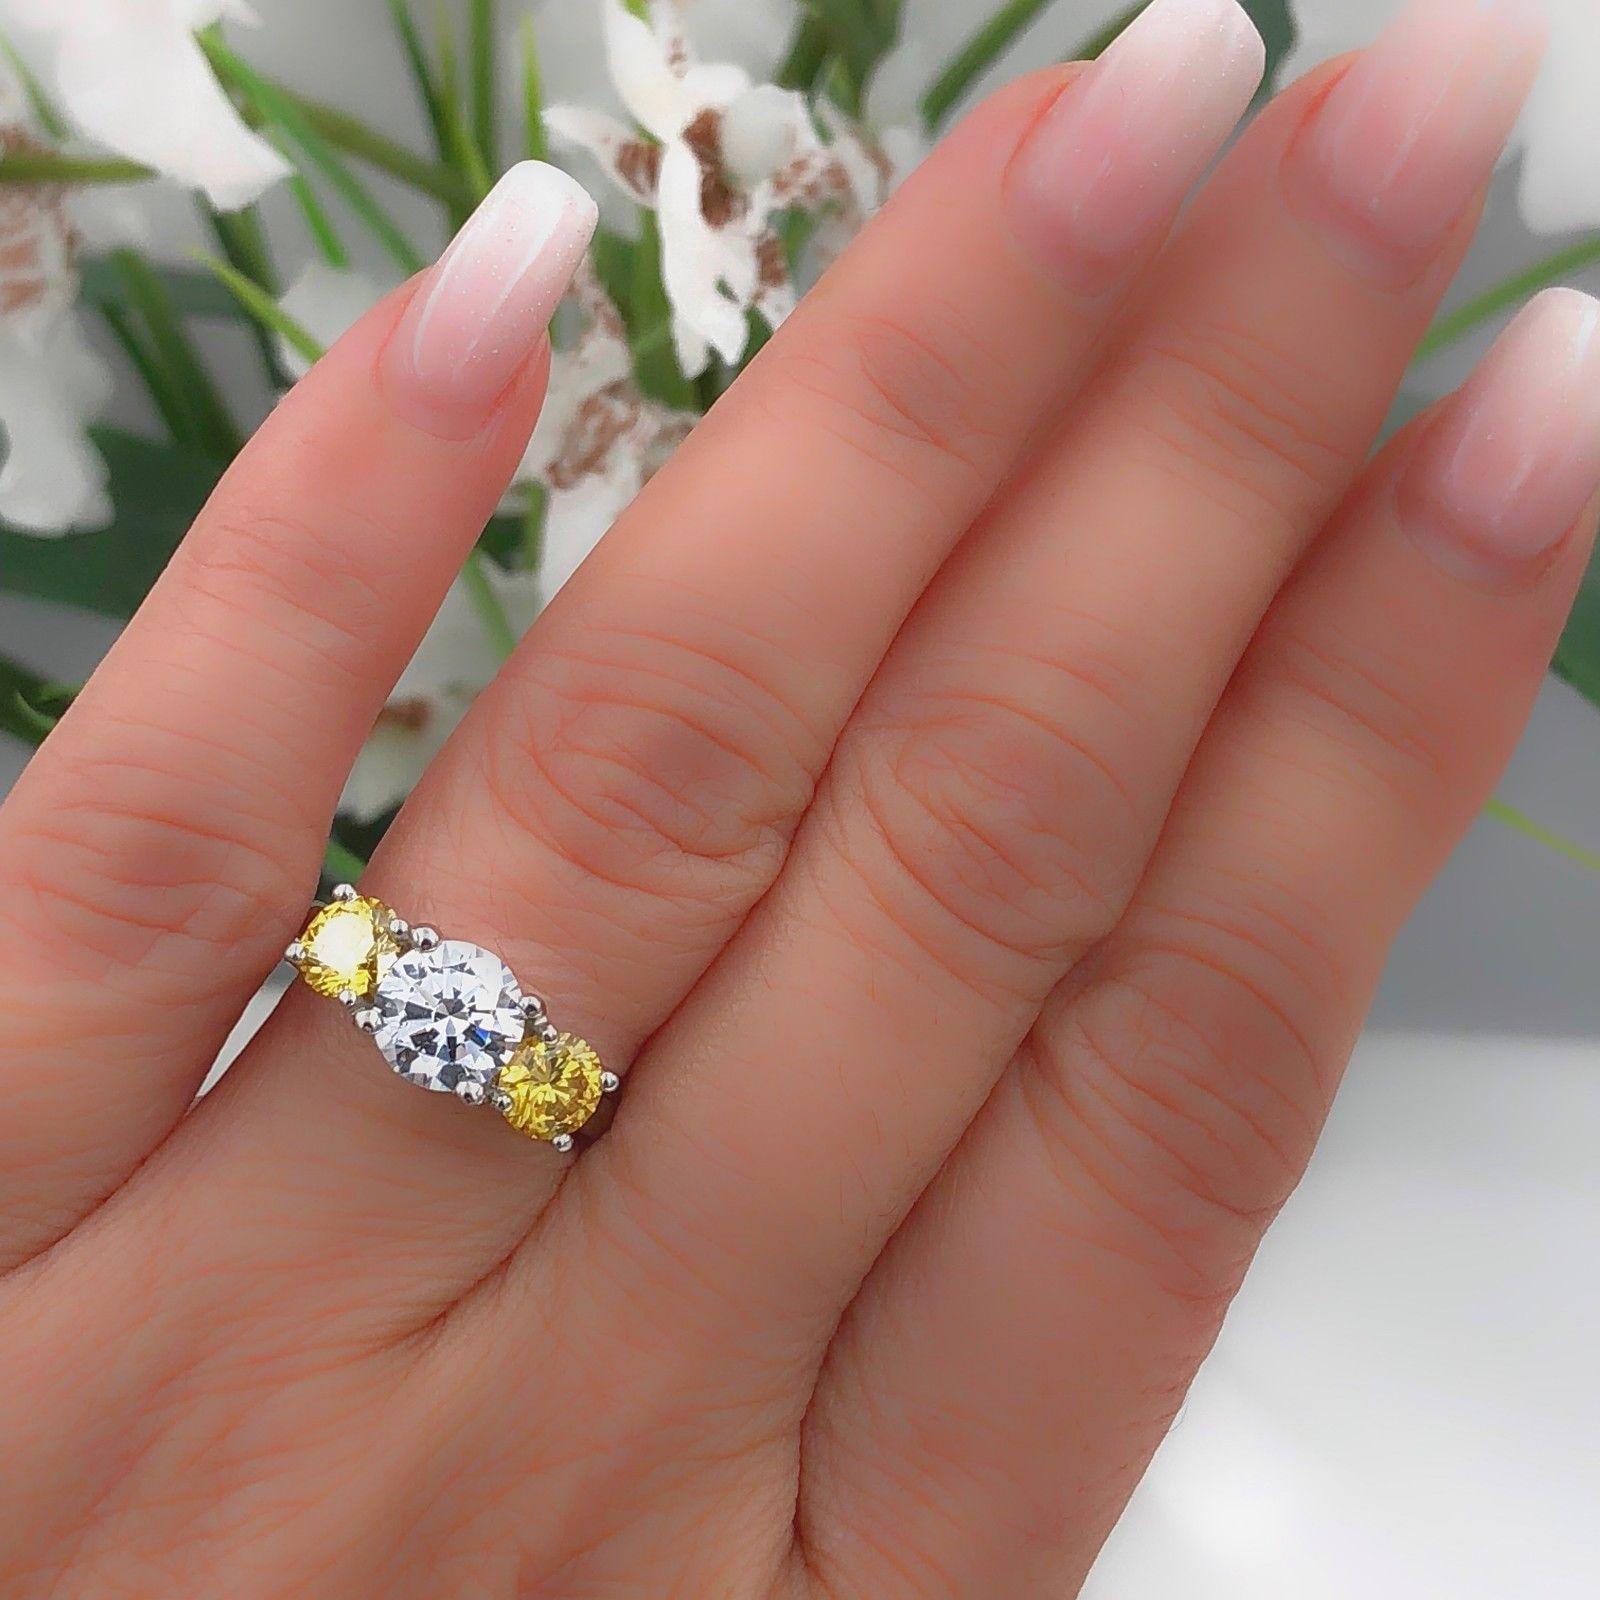 Style:  Three-Stone Fancy Yellow Diamonds Semi-Mount for Round Brilliant Center
Serial Number:  GIA #16417149 / GIA #16417152
Metal: Platinum
Size:  5.5 - sizable
Center will hold a Round Brilliant Diamond ~1.00-2.00 cts 
Side Stones #1:  Round